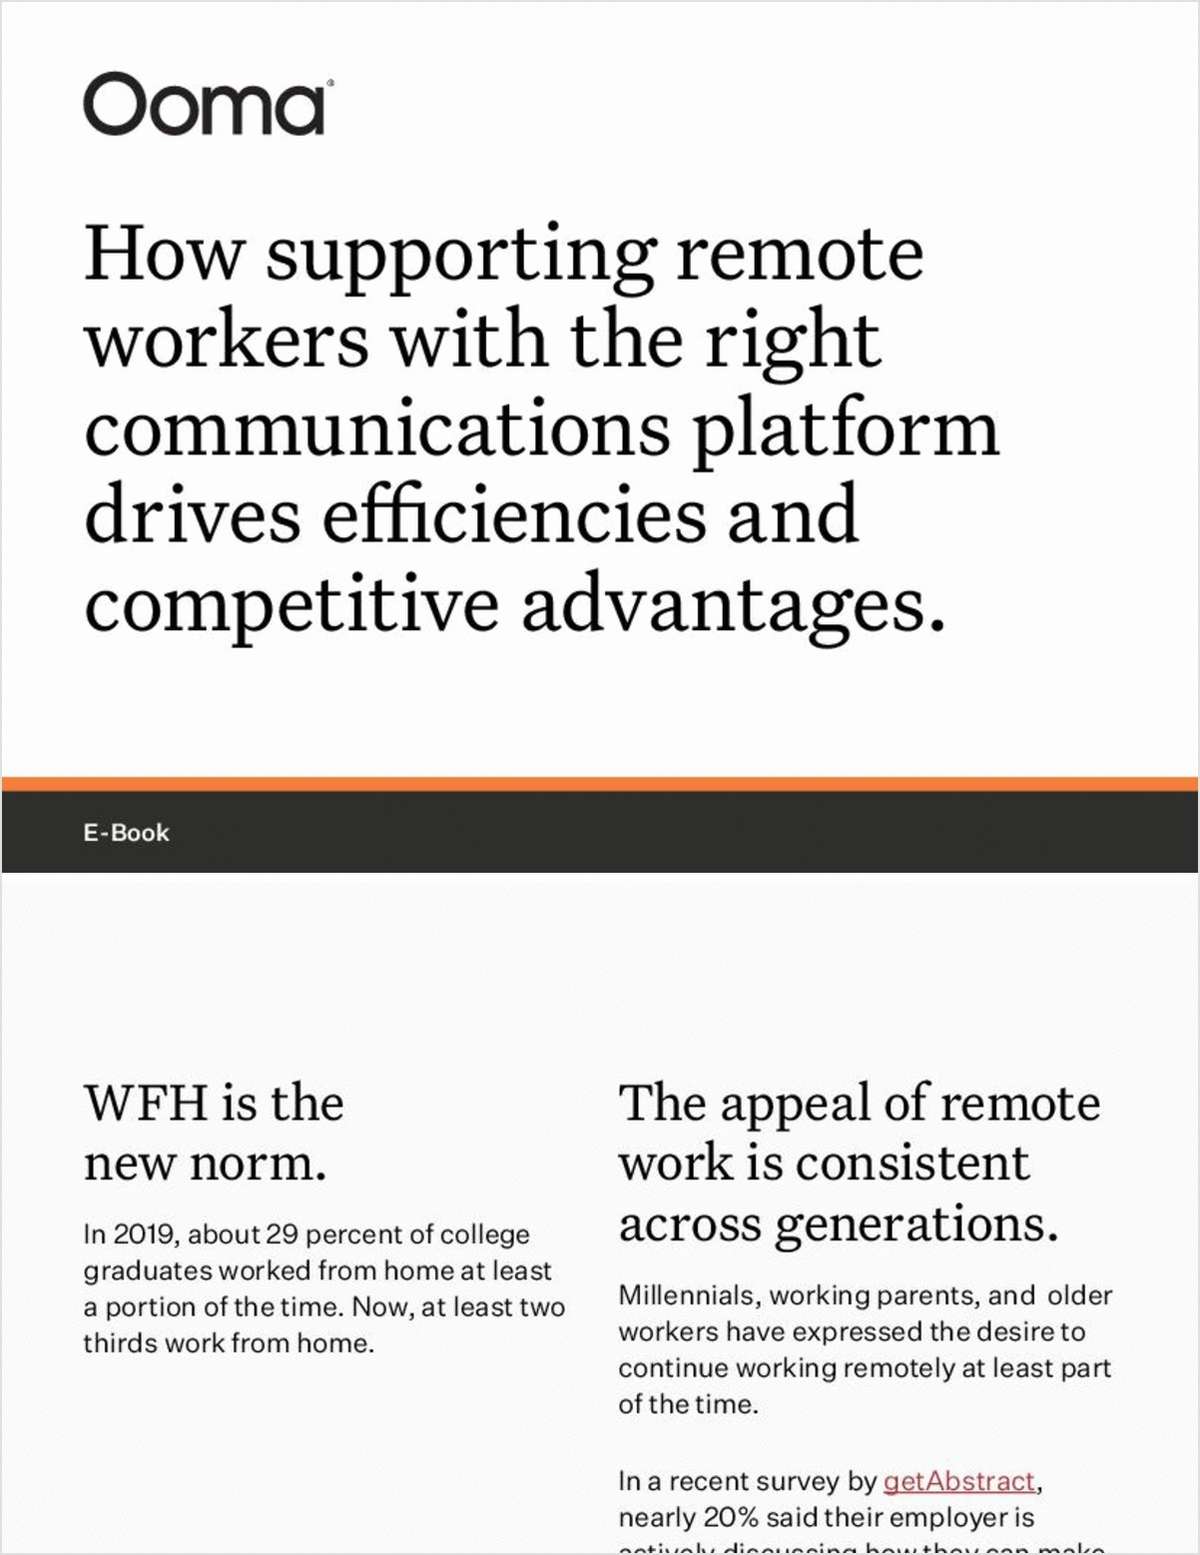 How supporting remote workers with the right communications platform drives efficiencies and competitive advantages